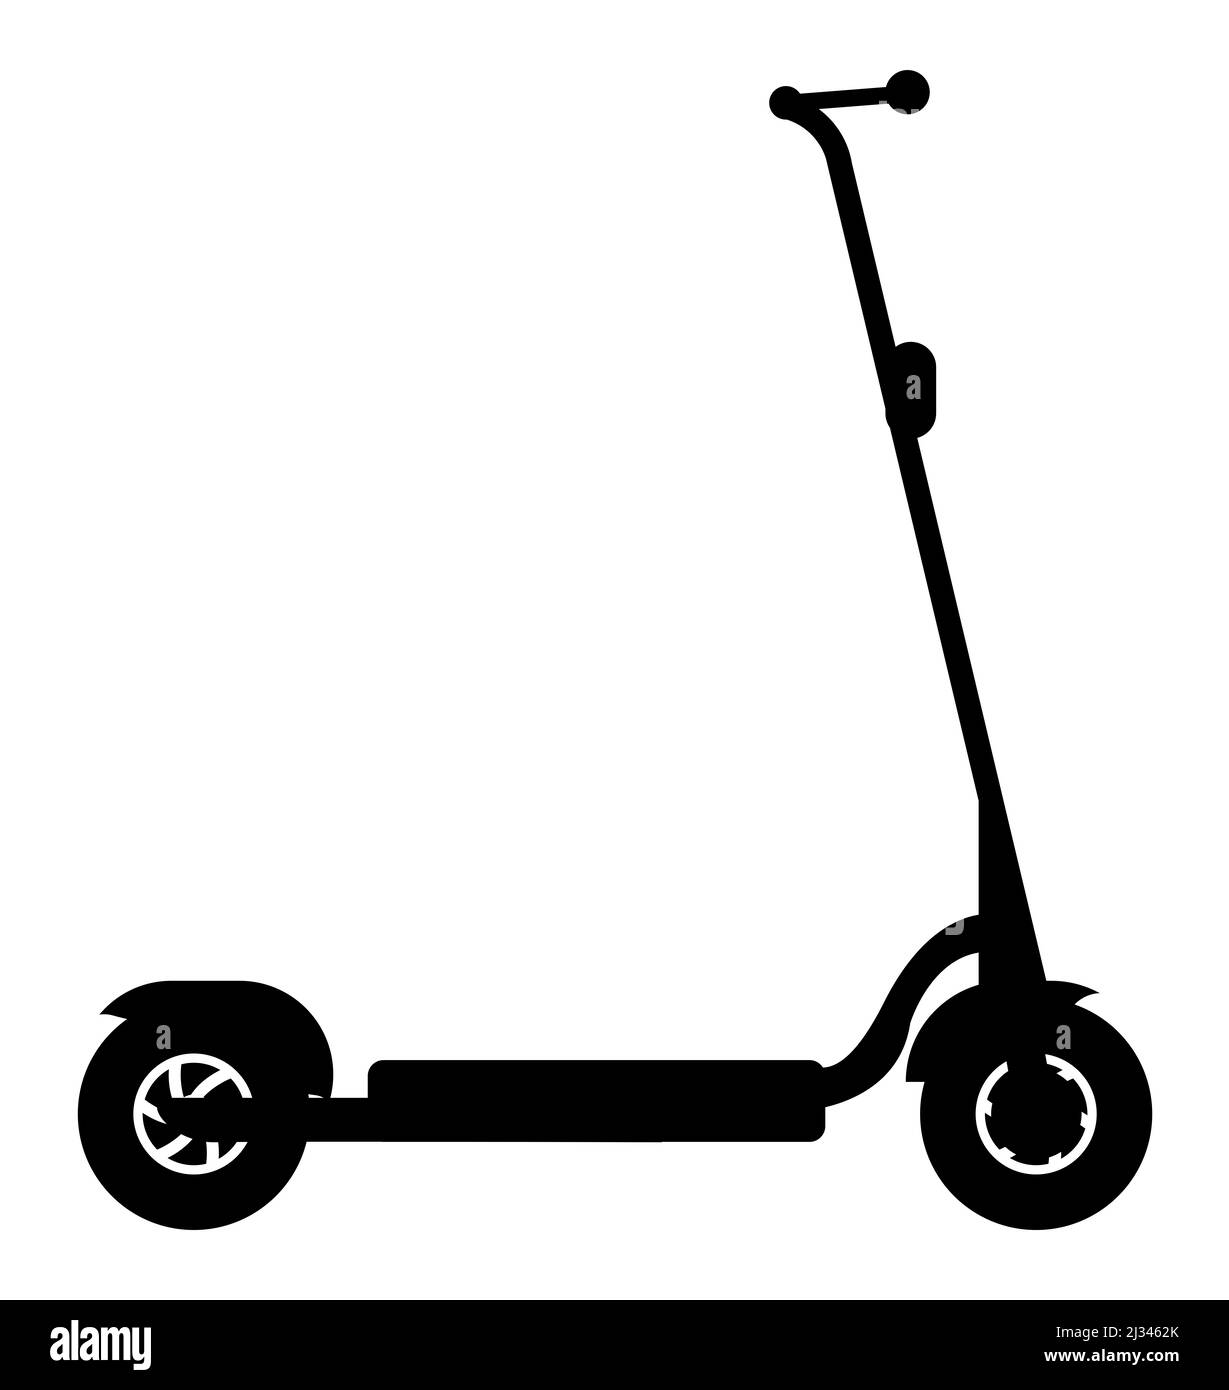 Silhouette of a typical e type scooter in black silhouette on a white background Stock Photo